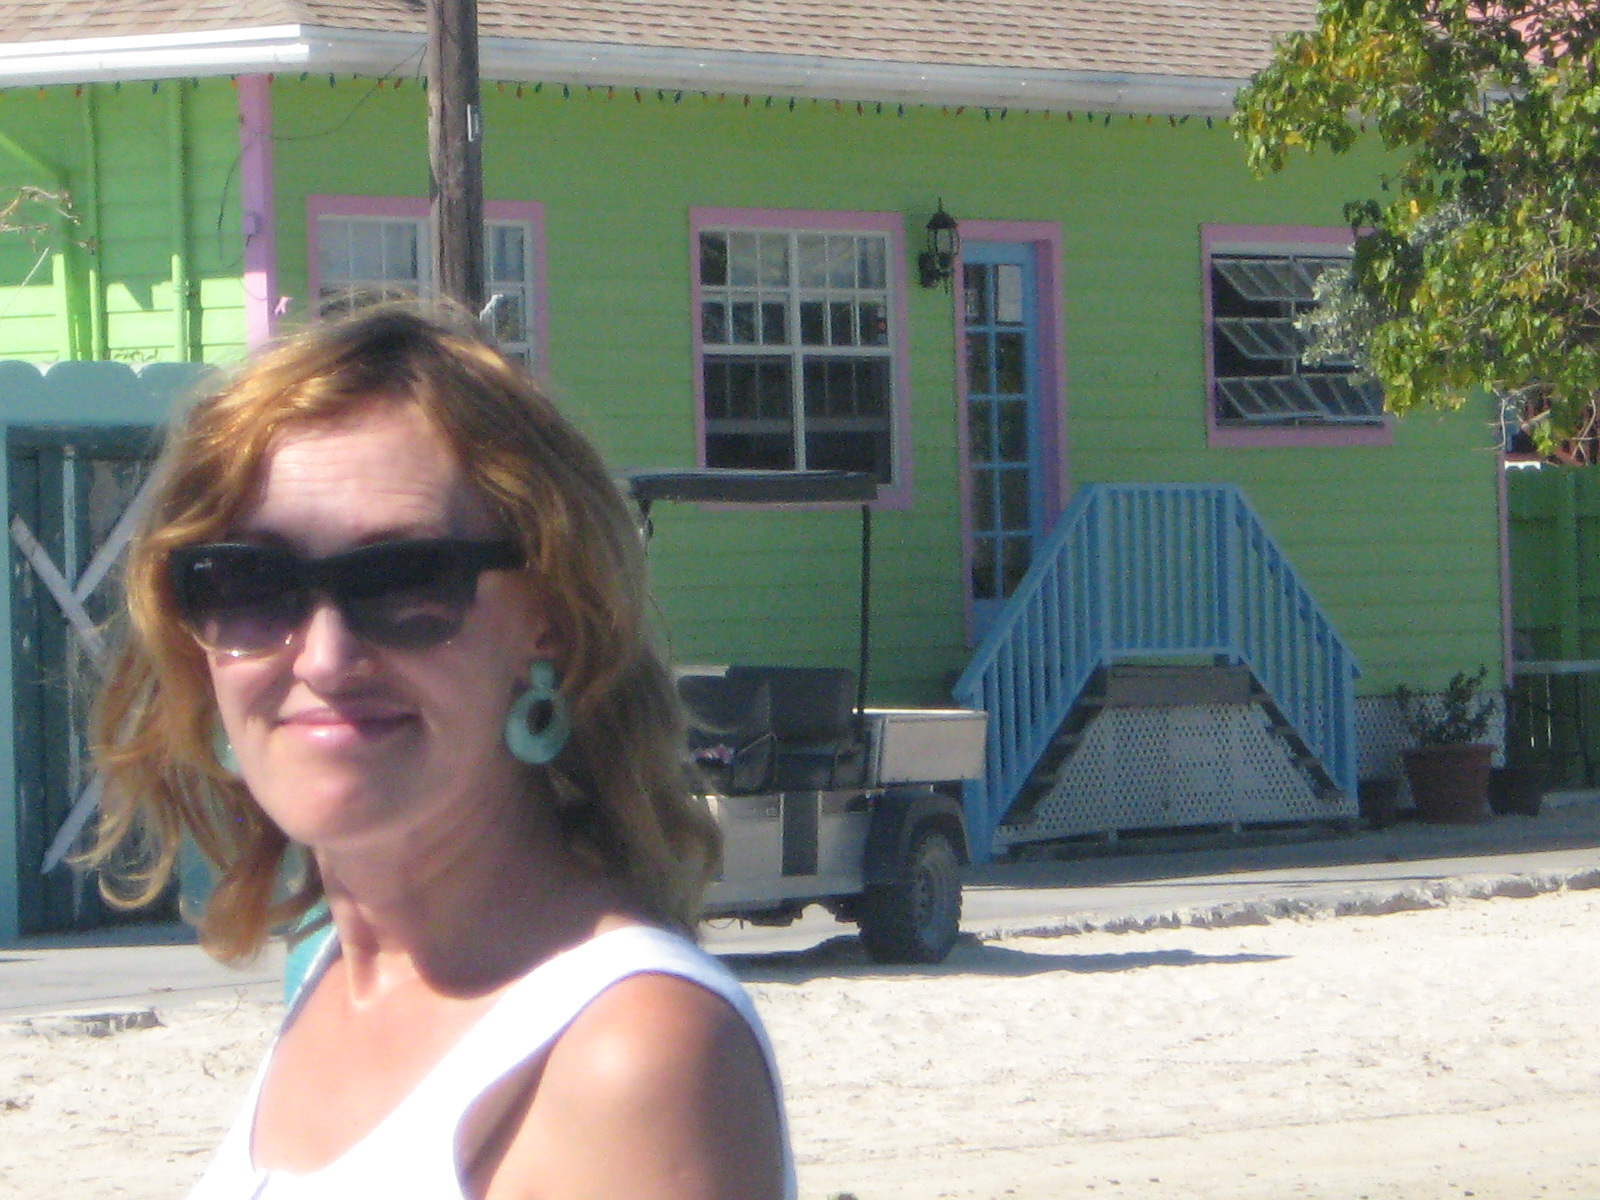 Elena in front of a typical colorful house in New Plymouth